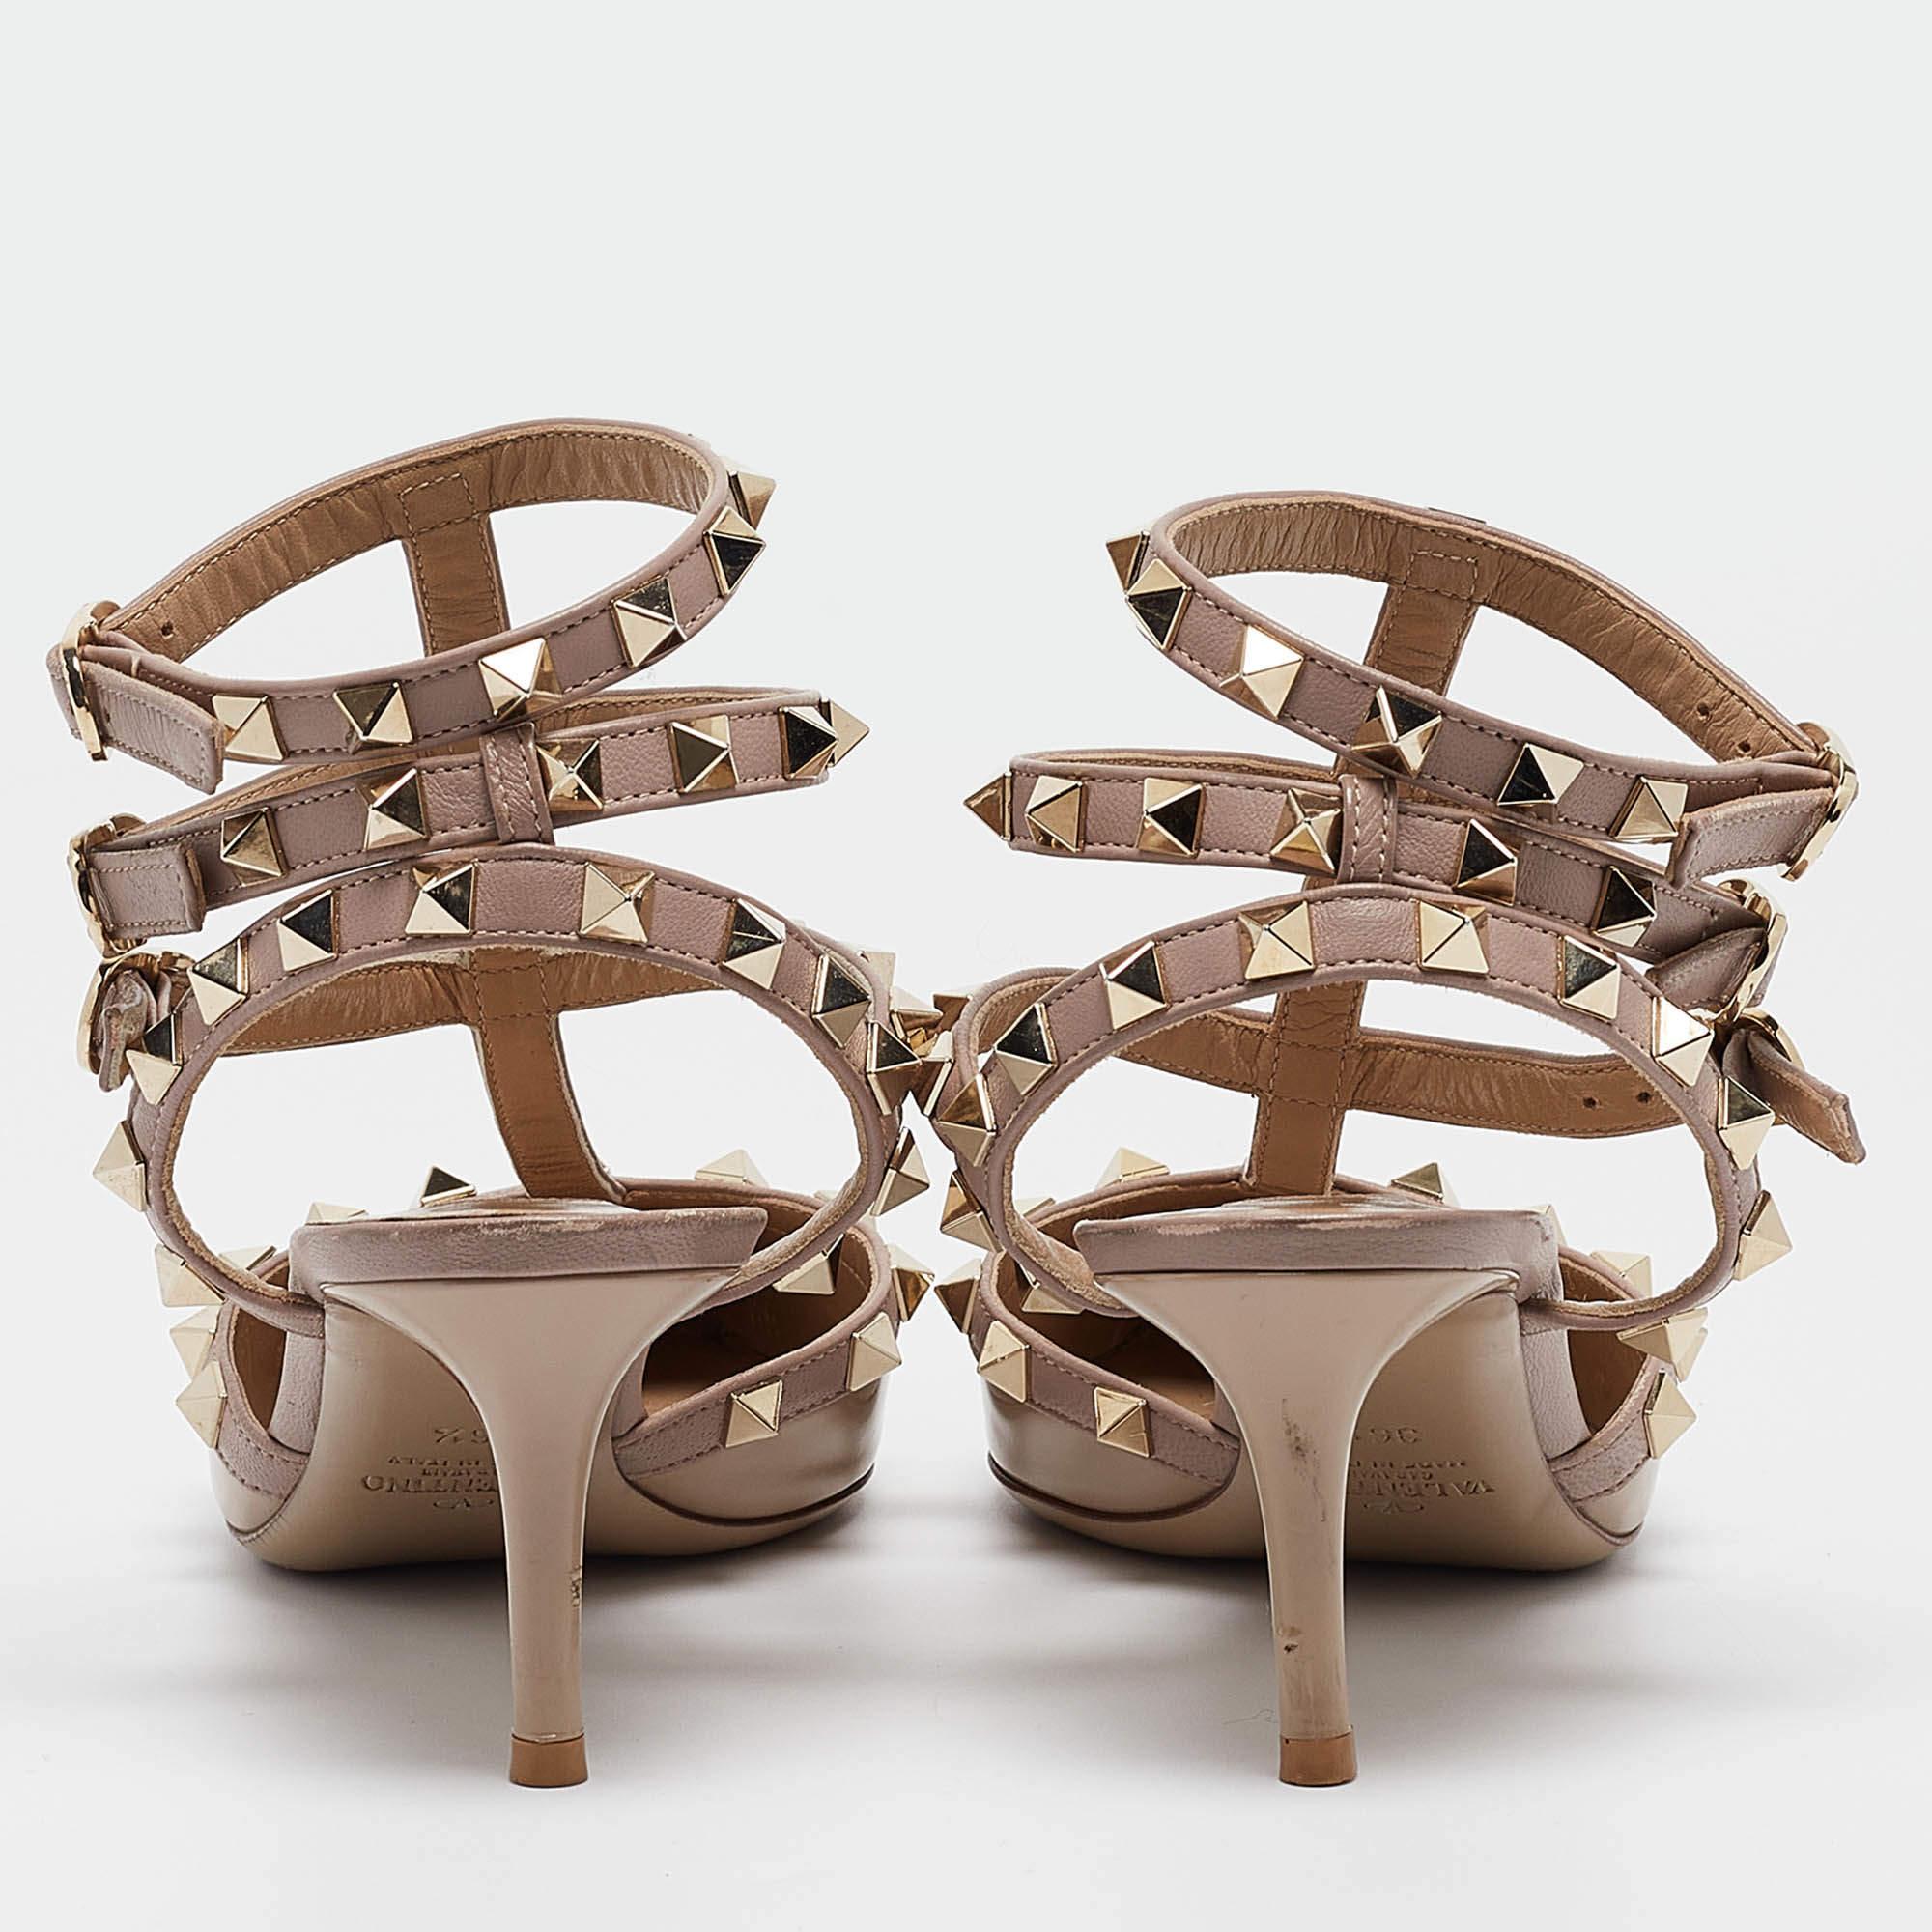 With meticulous craftsmanship and glamorous details, this Valentino pair of pumps reflects the brand's expertise in creating innovative and admirable designs. The Rockstuds elegantly outline the upper straps and makes it undeniably chic. Created